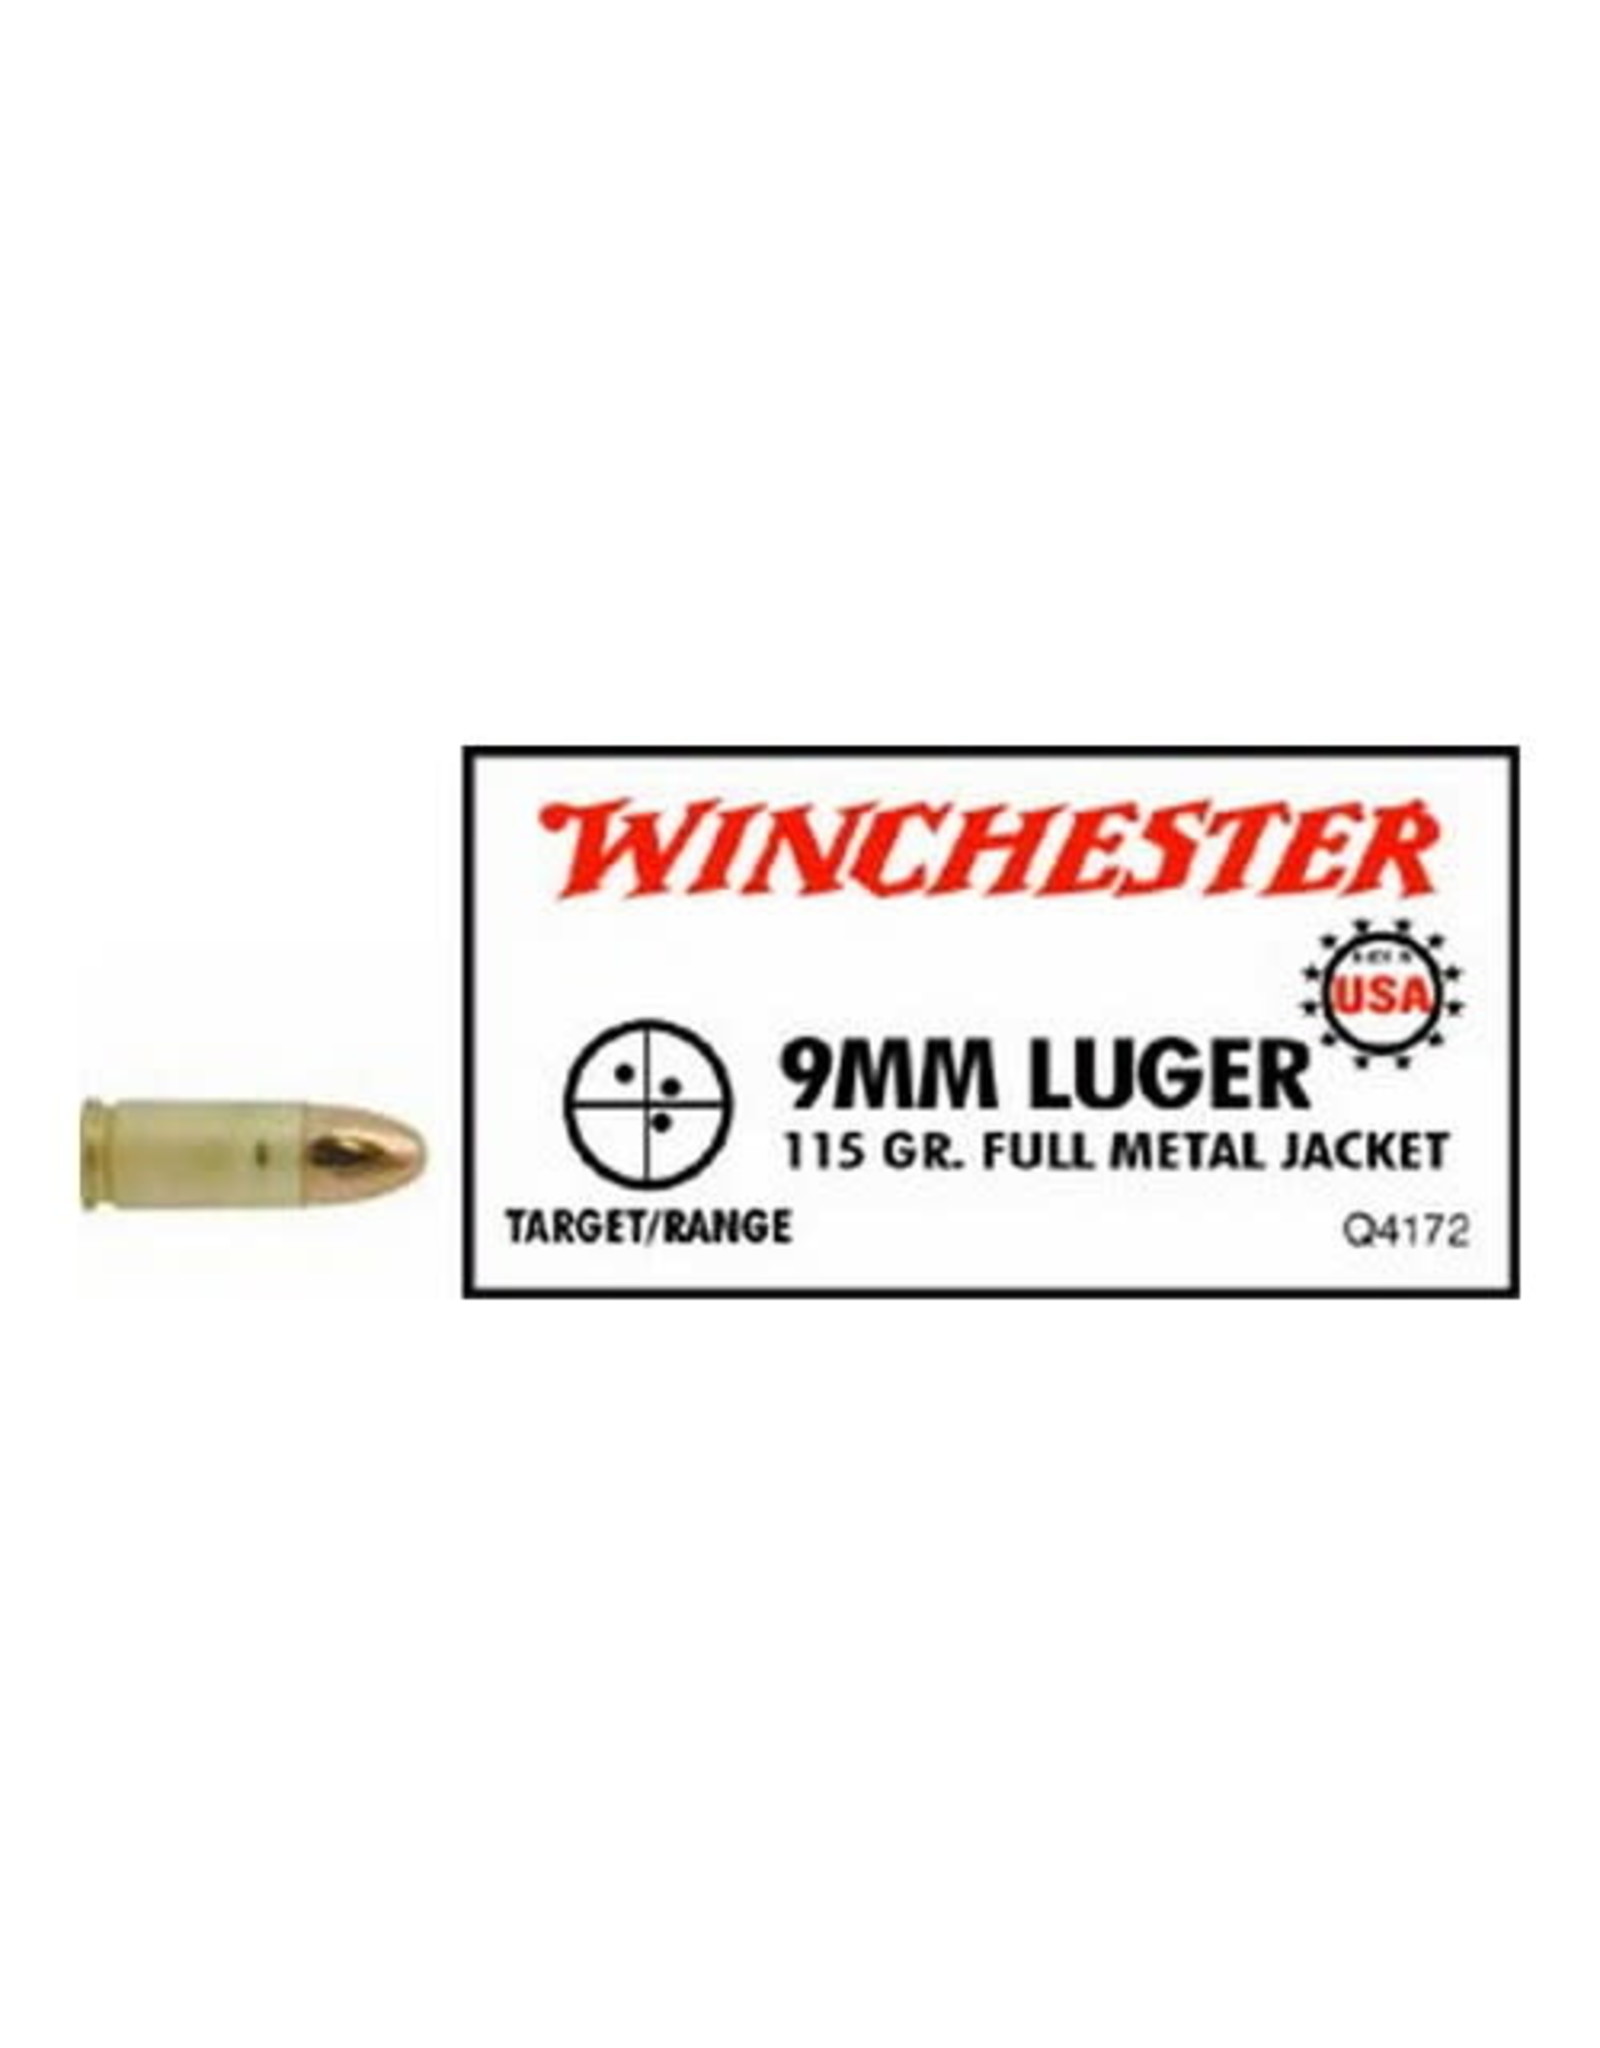 Winchester Winchester Q4172 Pistol Ammo 9MM, FMJ, 115 Gr, 1190 fps, 50 Rnd, Boxed